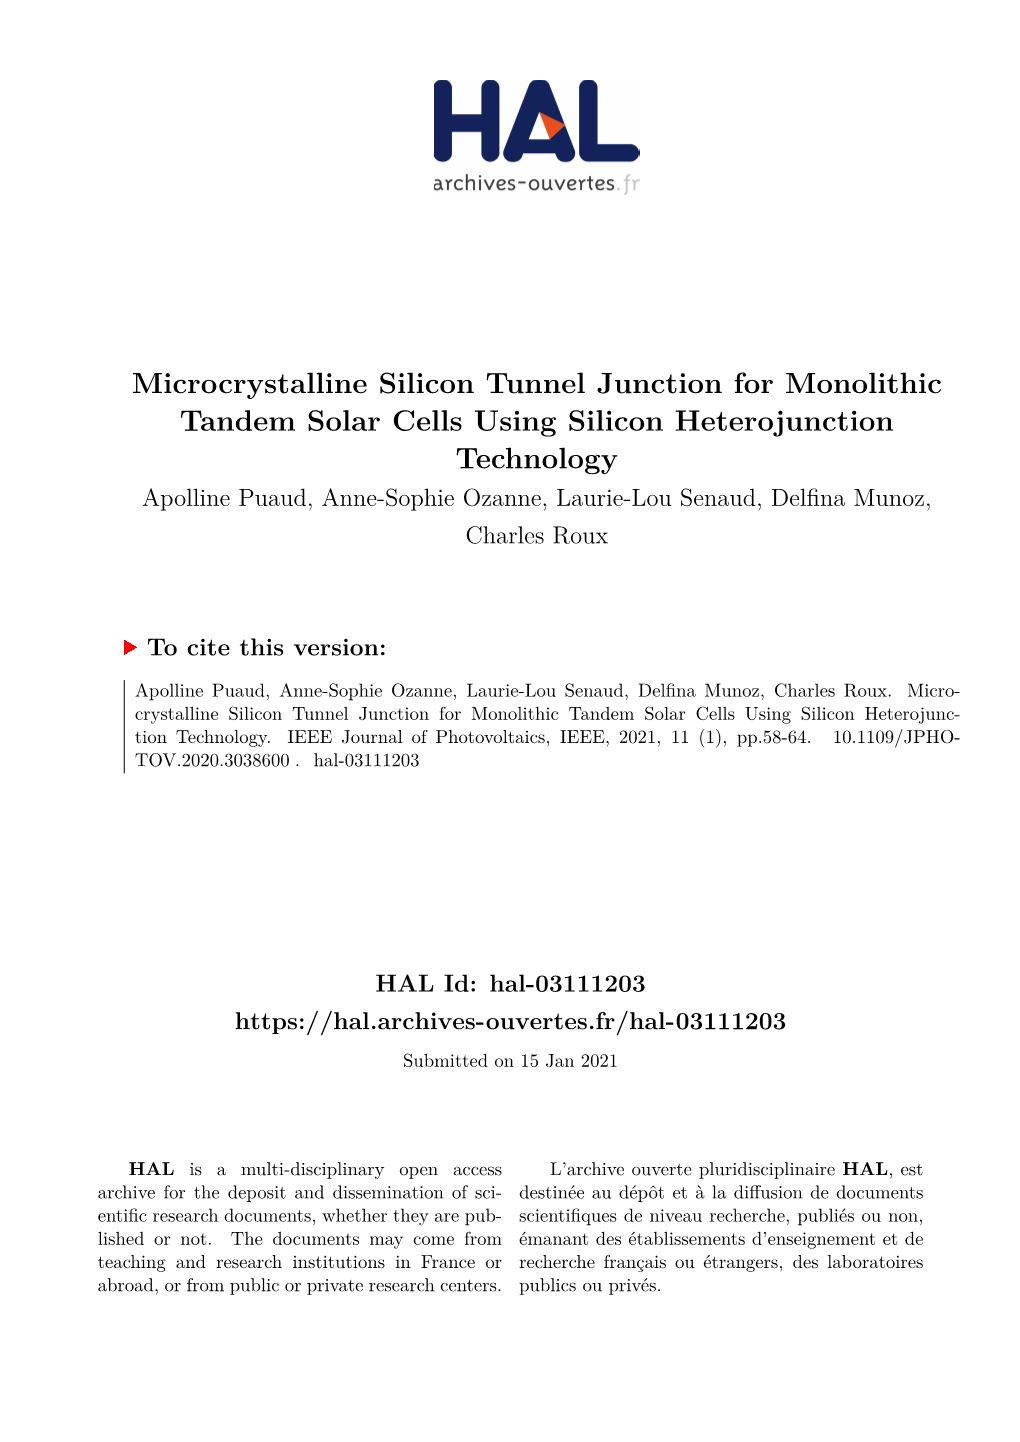 Microcrystalline Silicon Tunnel Junction for Monolithic Tandem